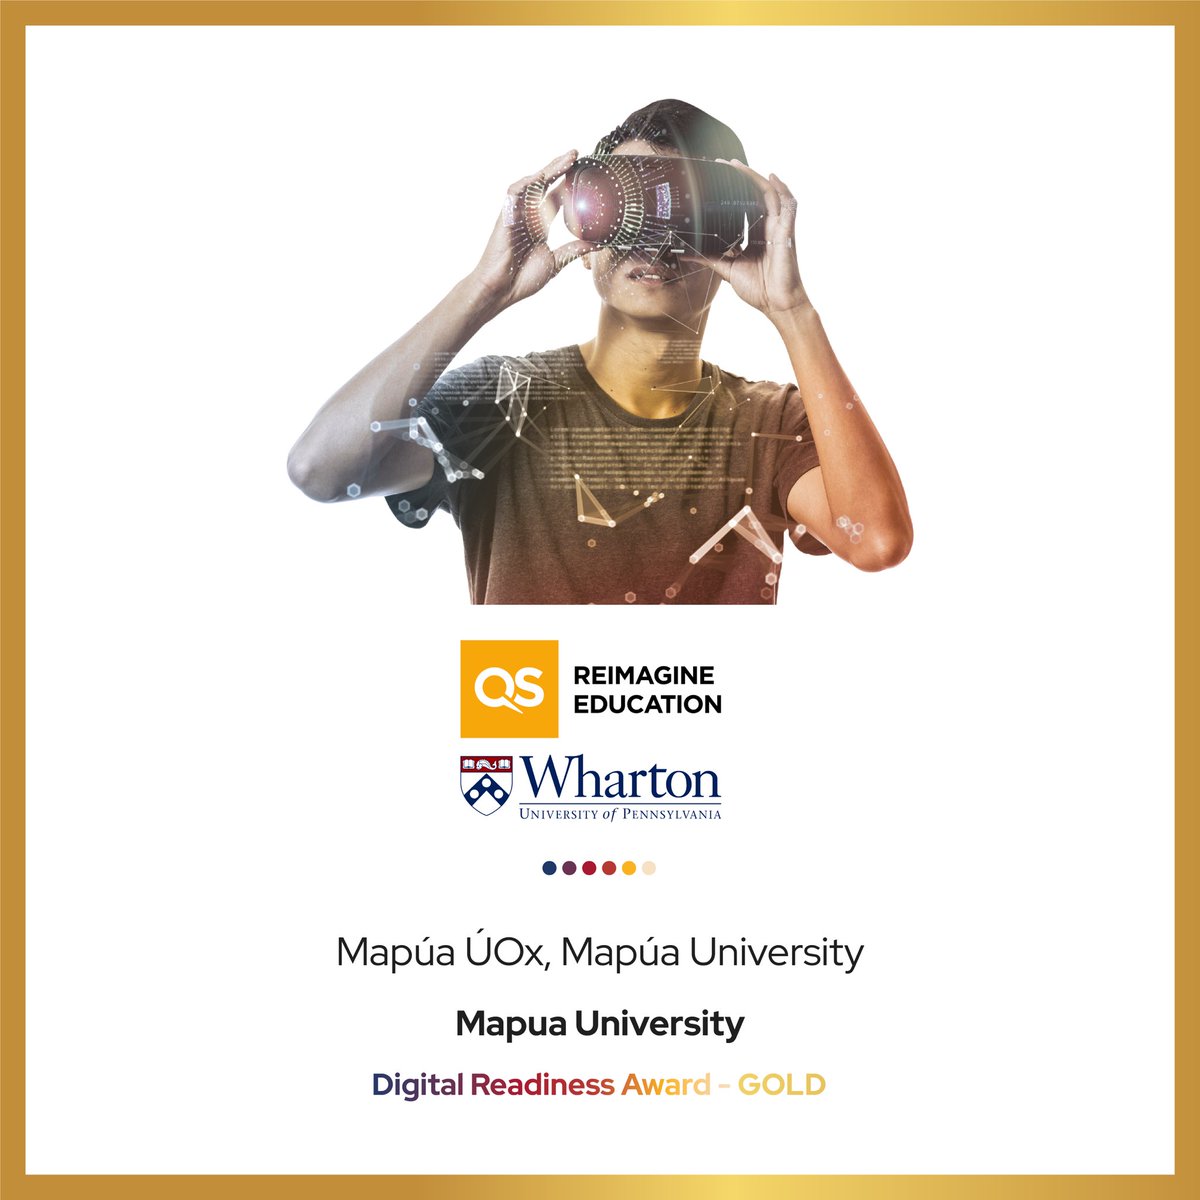 GOLD for @MapuaUniv at the 2022 @ReimagineHEdu Awards. Still feels surreal! Lone awardee from the Philippines this year! Check out our winning innovation for the Digital Readiness Category at mapua.edu.ph/uox/. #QSReimagine #VivaMapúa 🥇🇵🇭